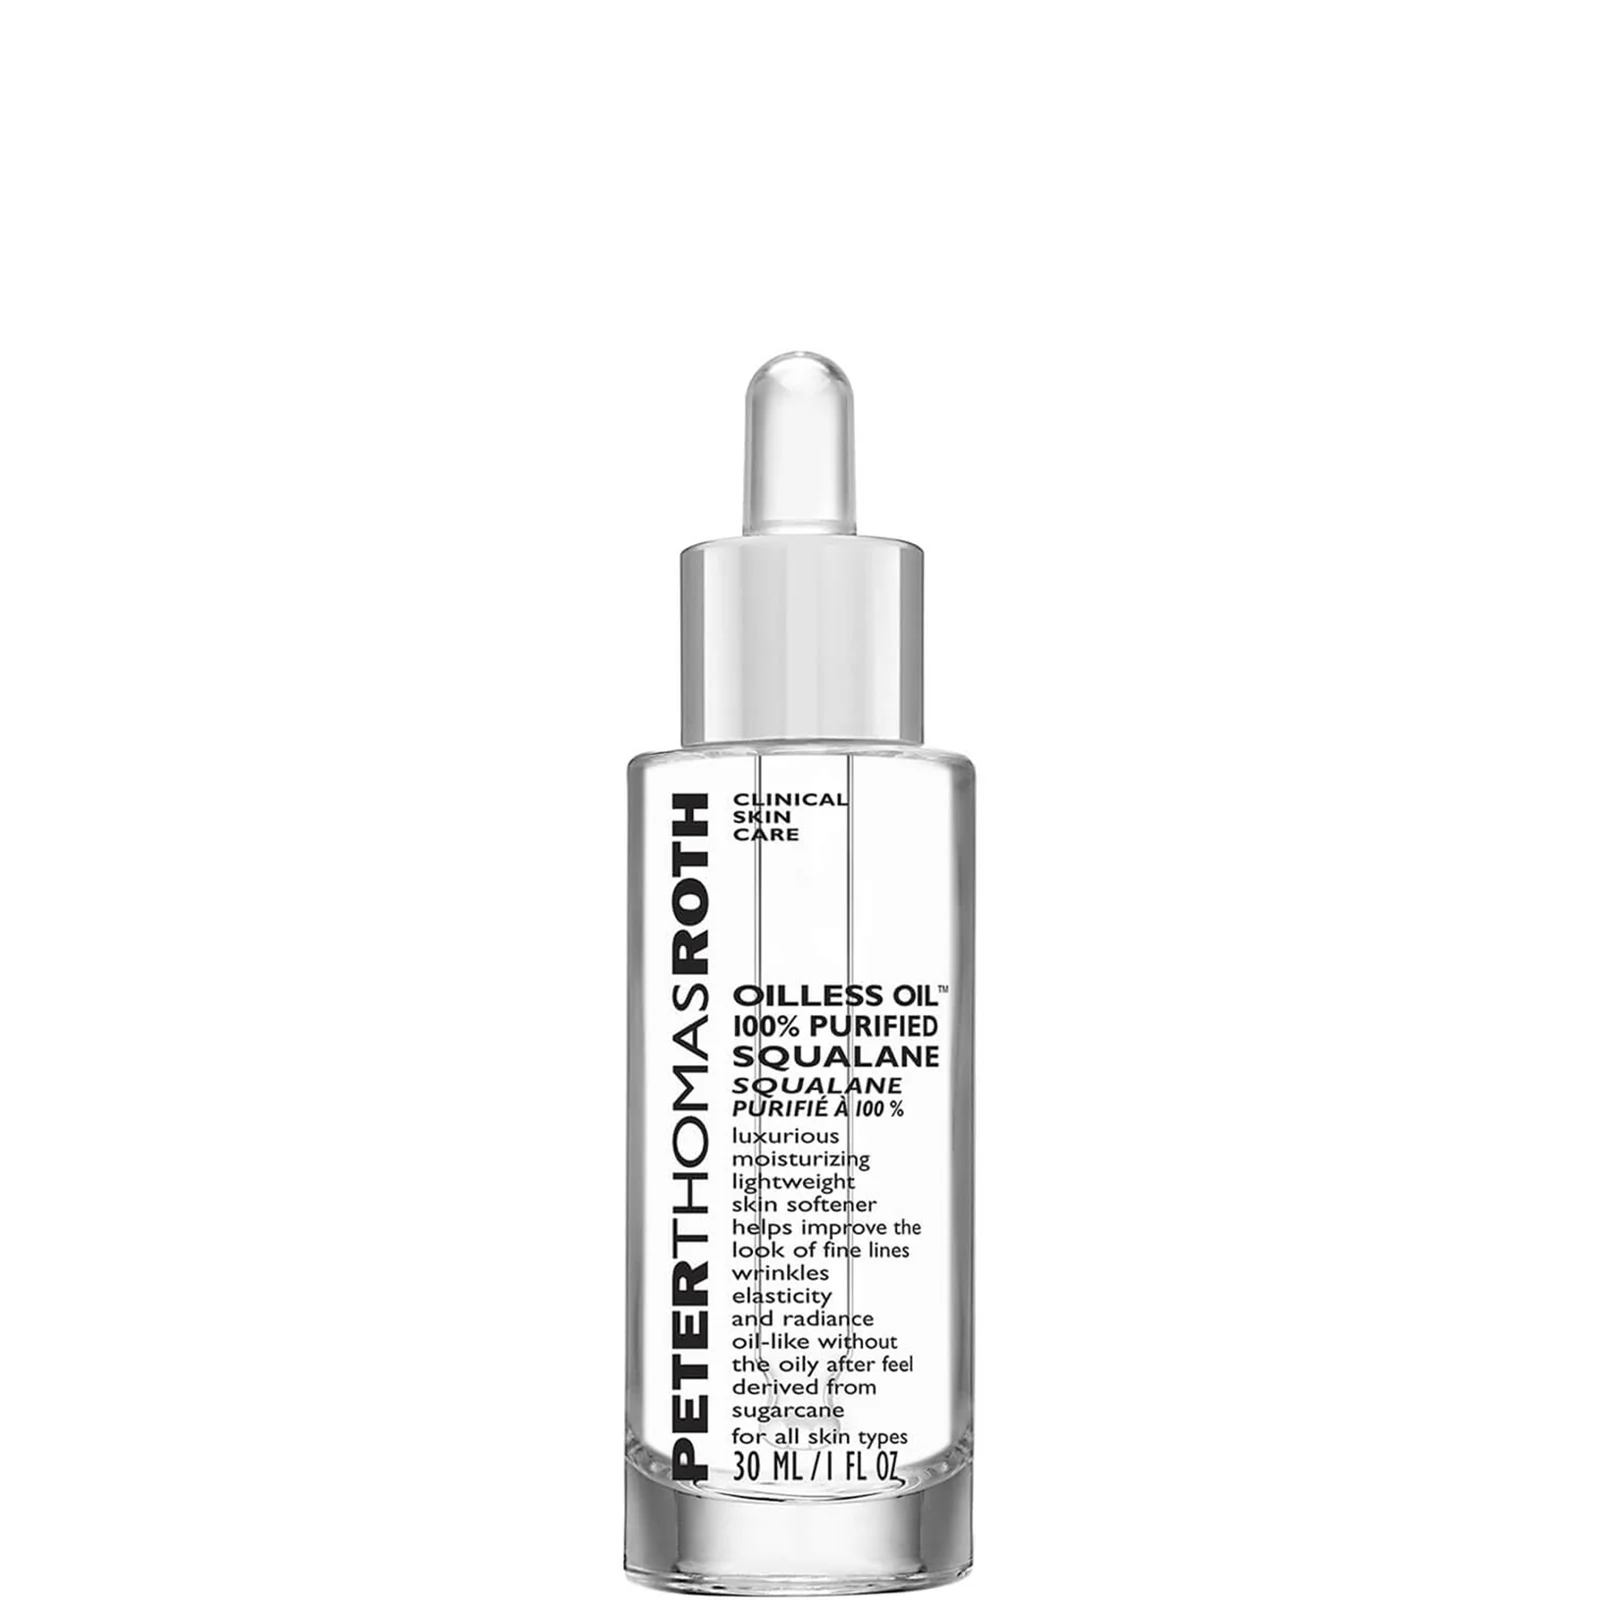 Peter Thomas Roth Oiless Oil 100% Purified Squalane Image 1